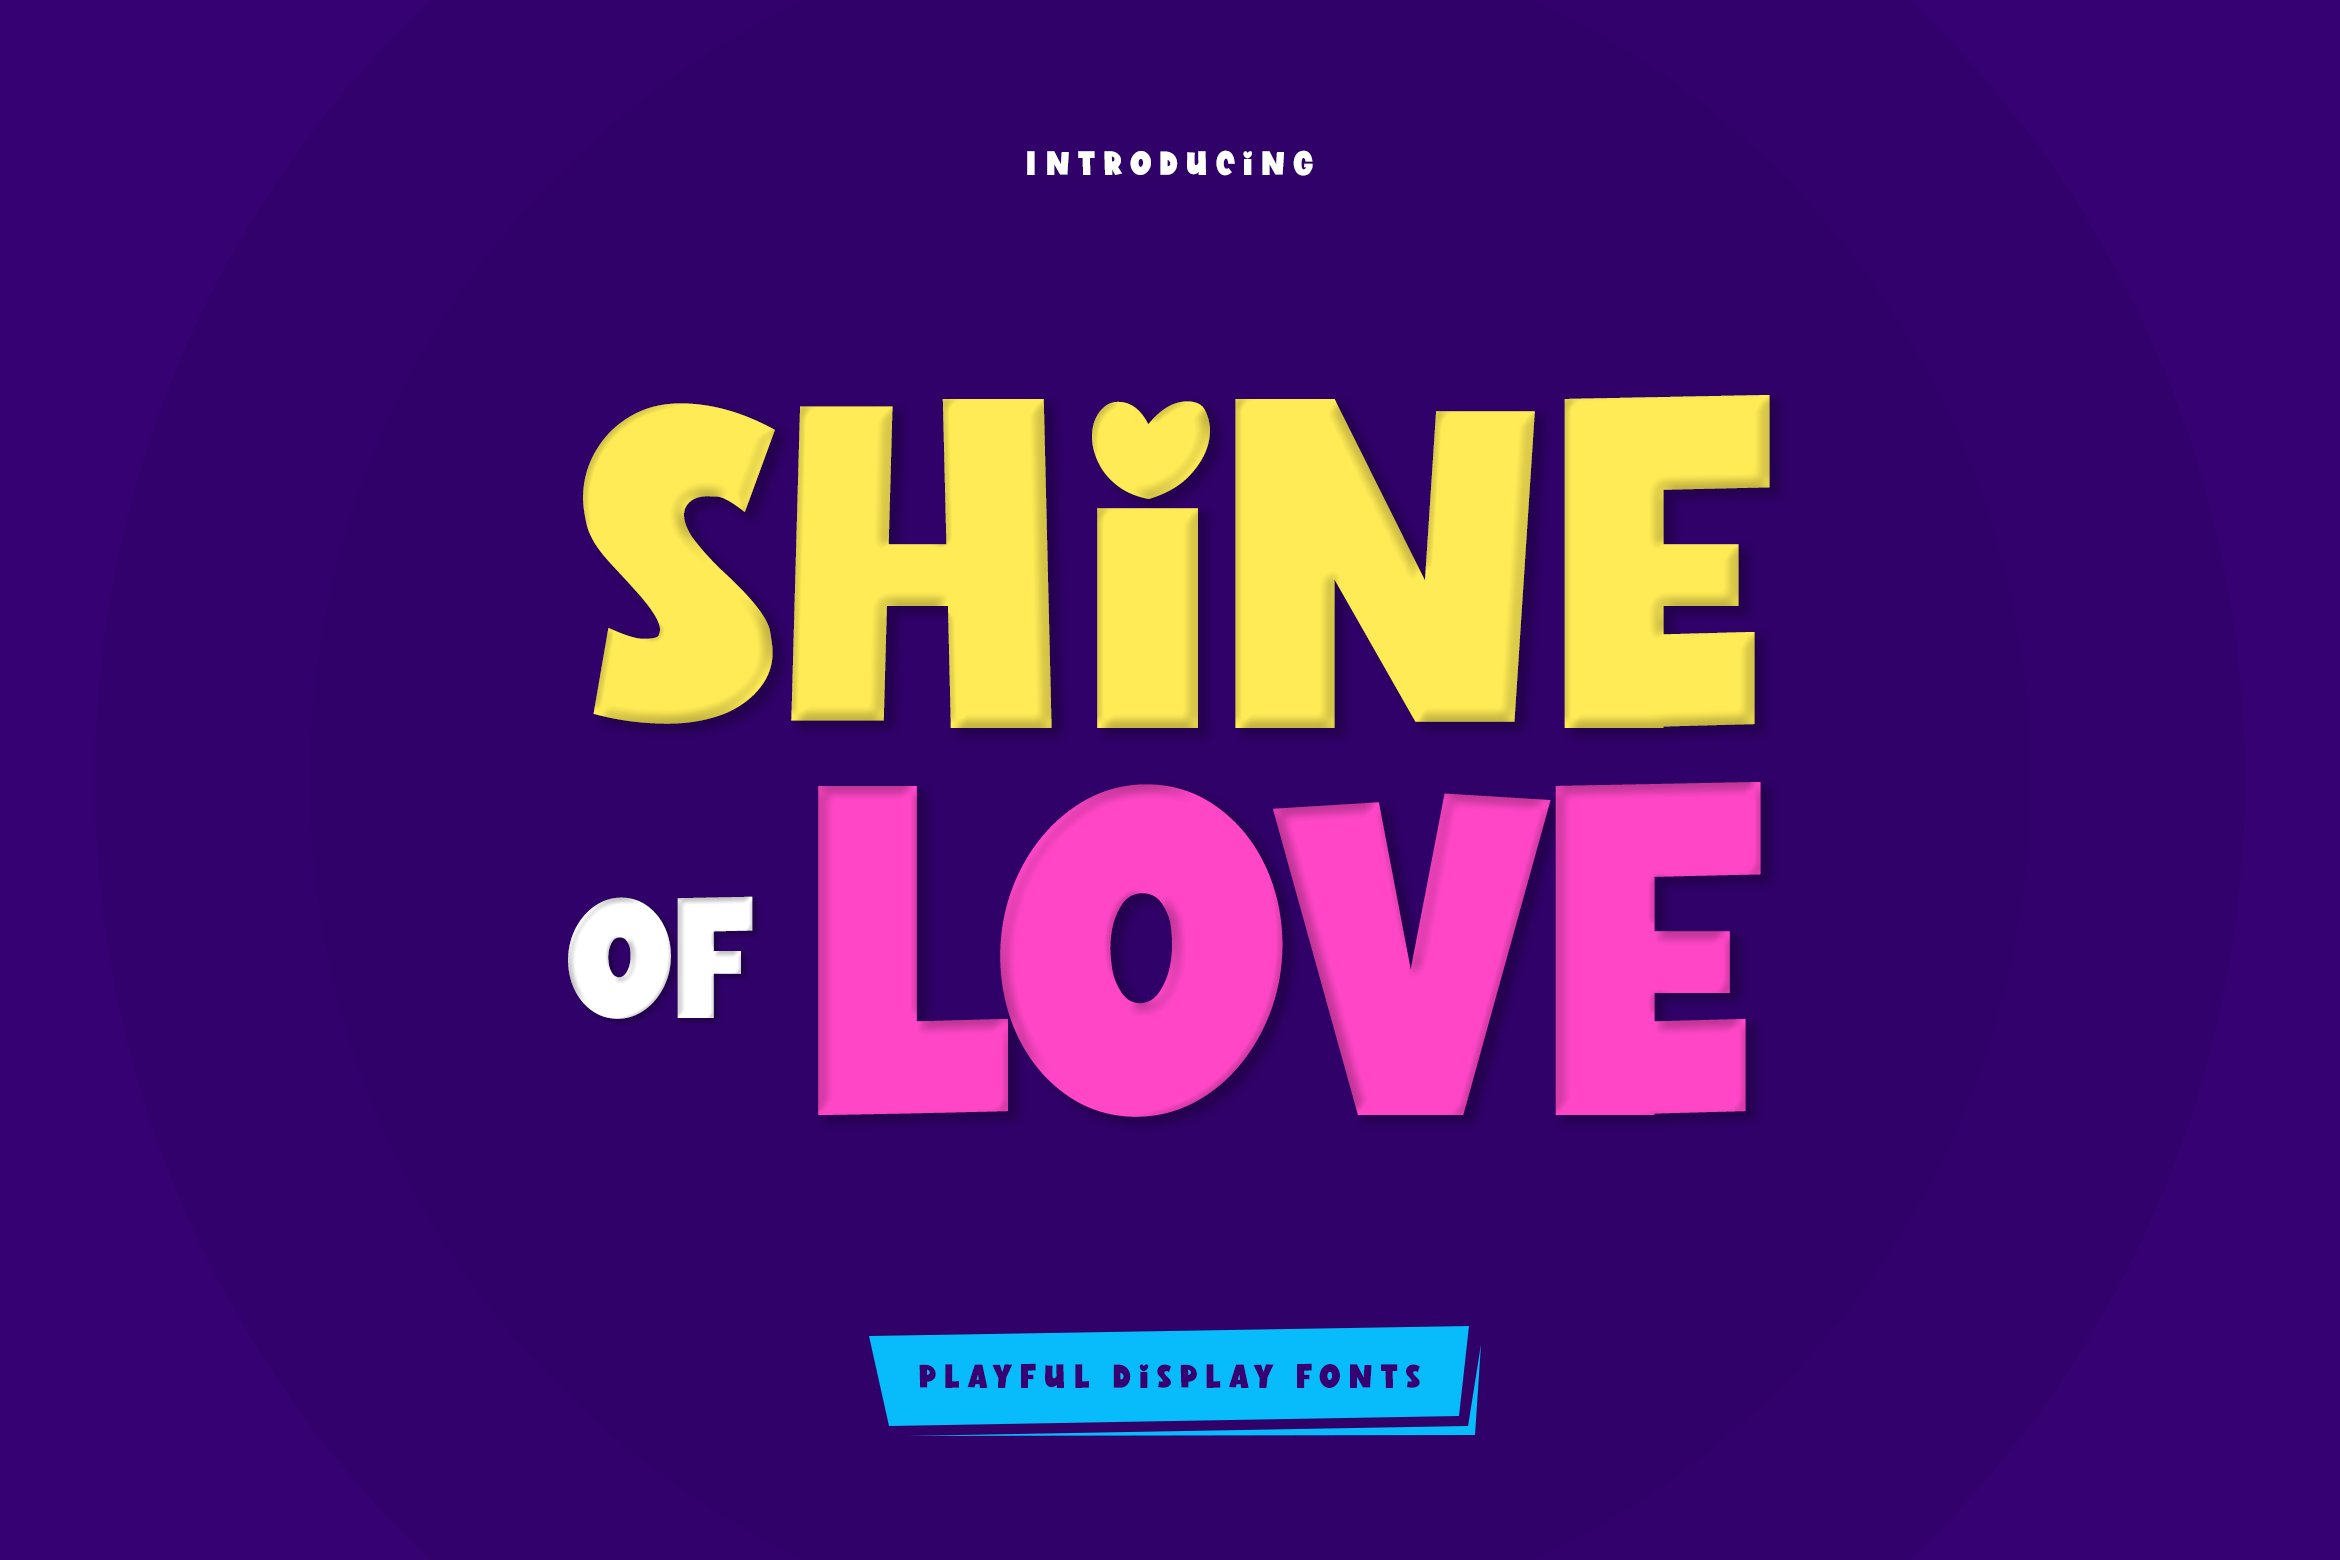 Shine of Love cover image.